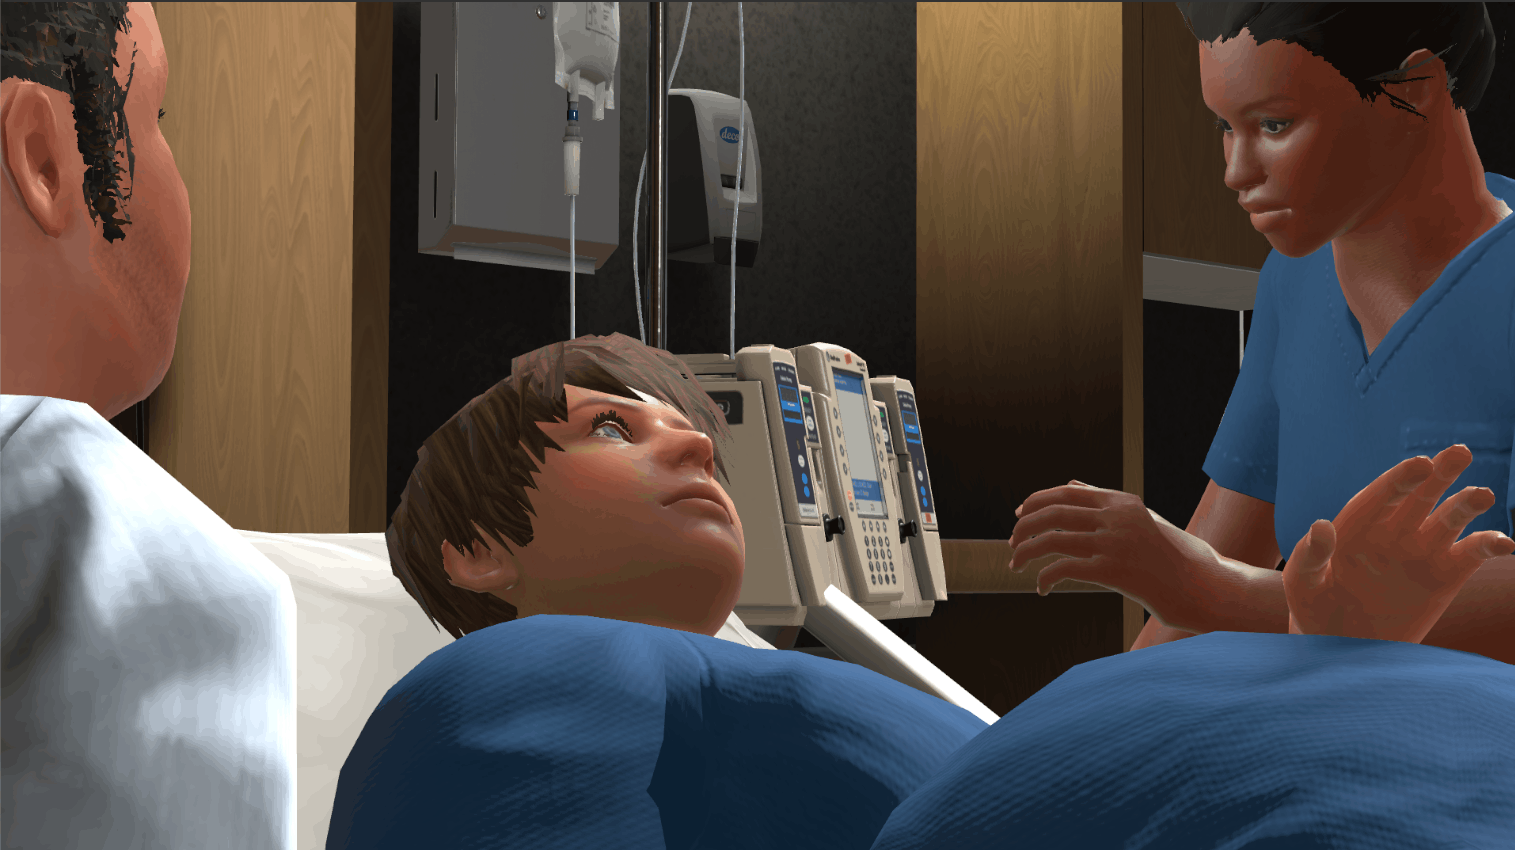 VR simulation training for healthcare